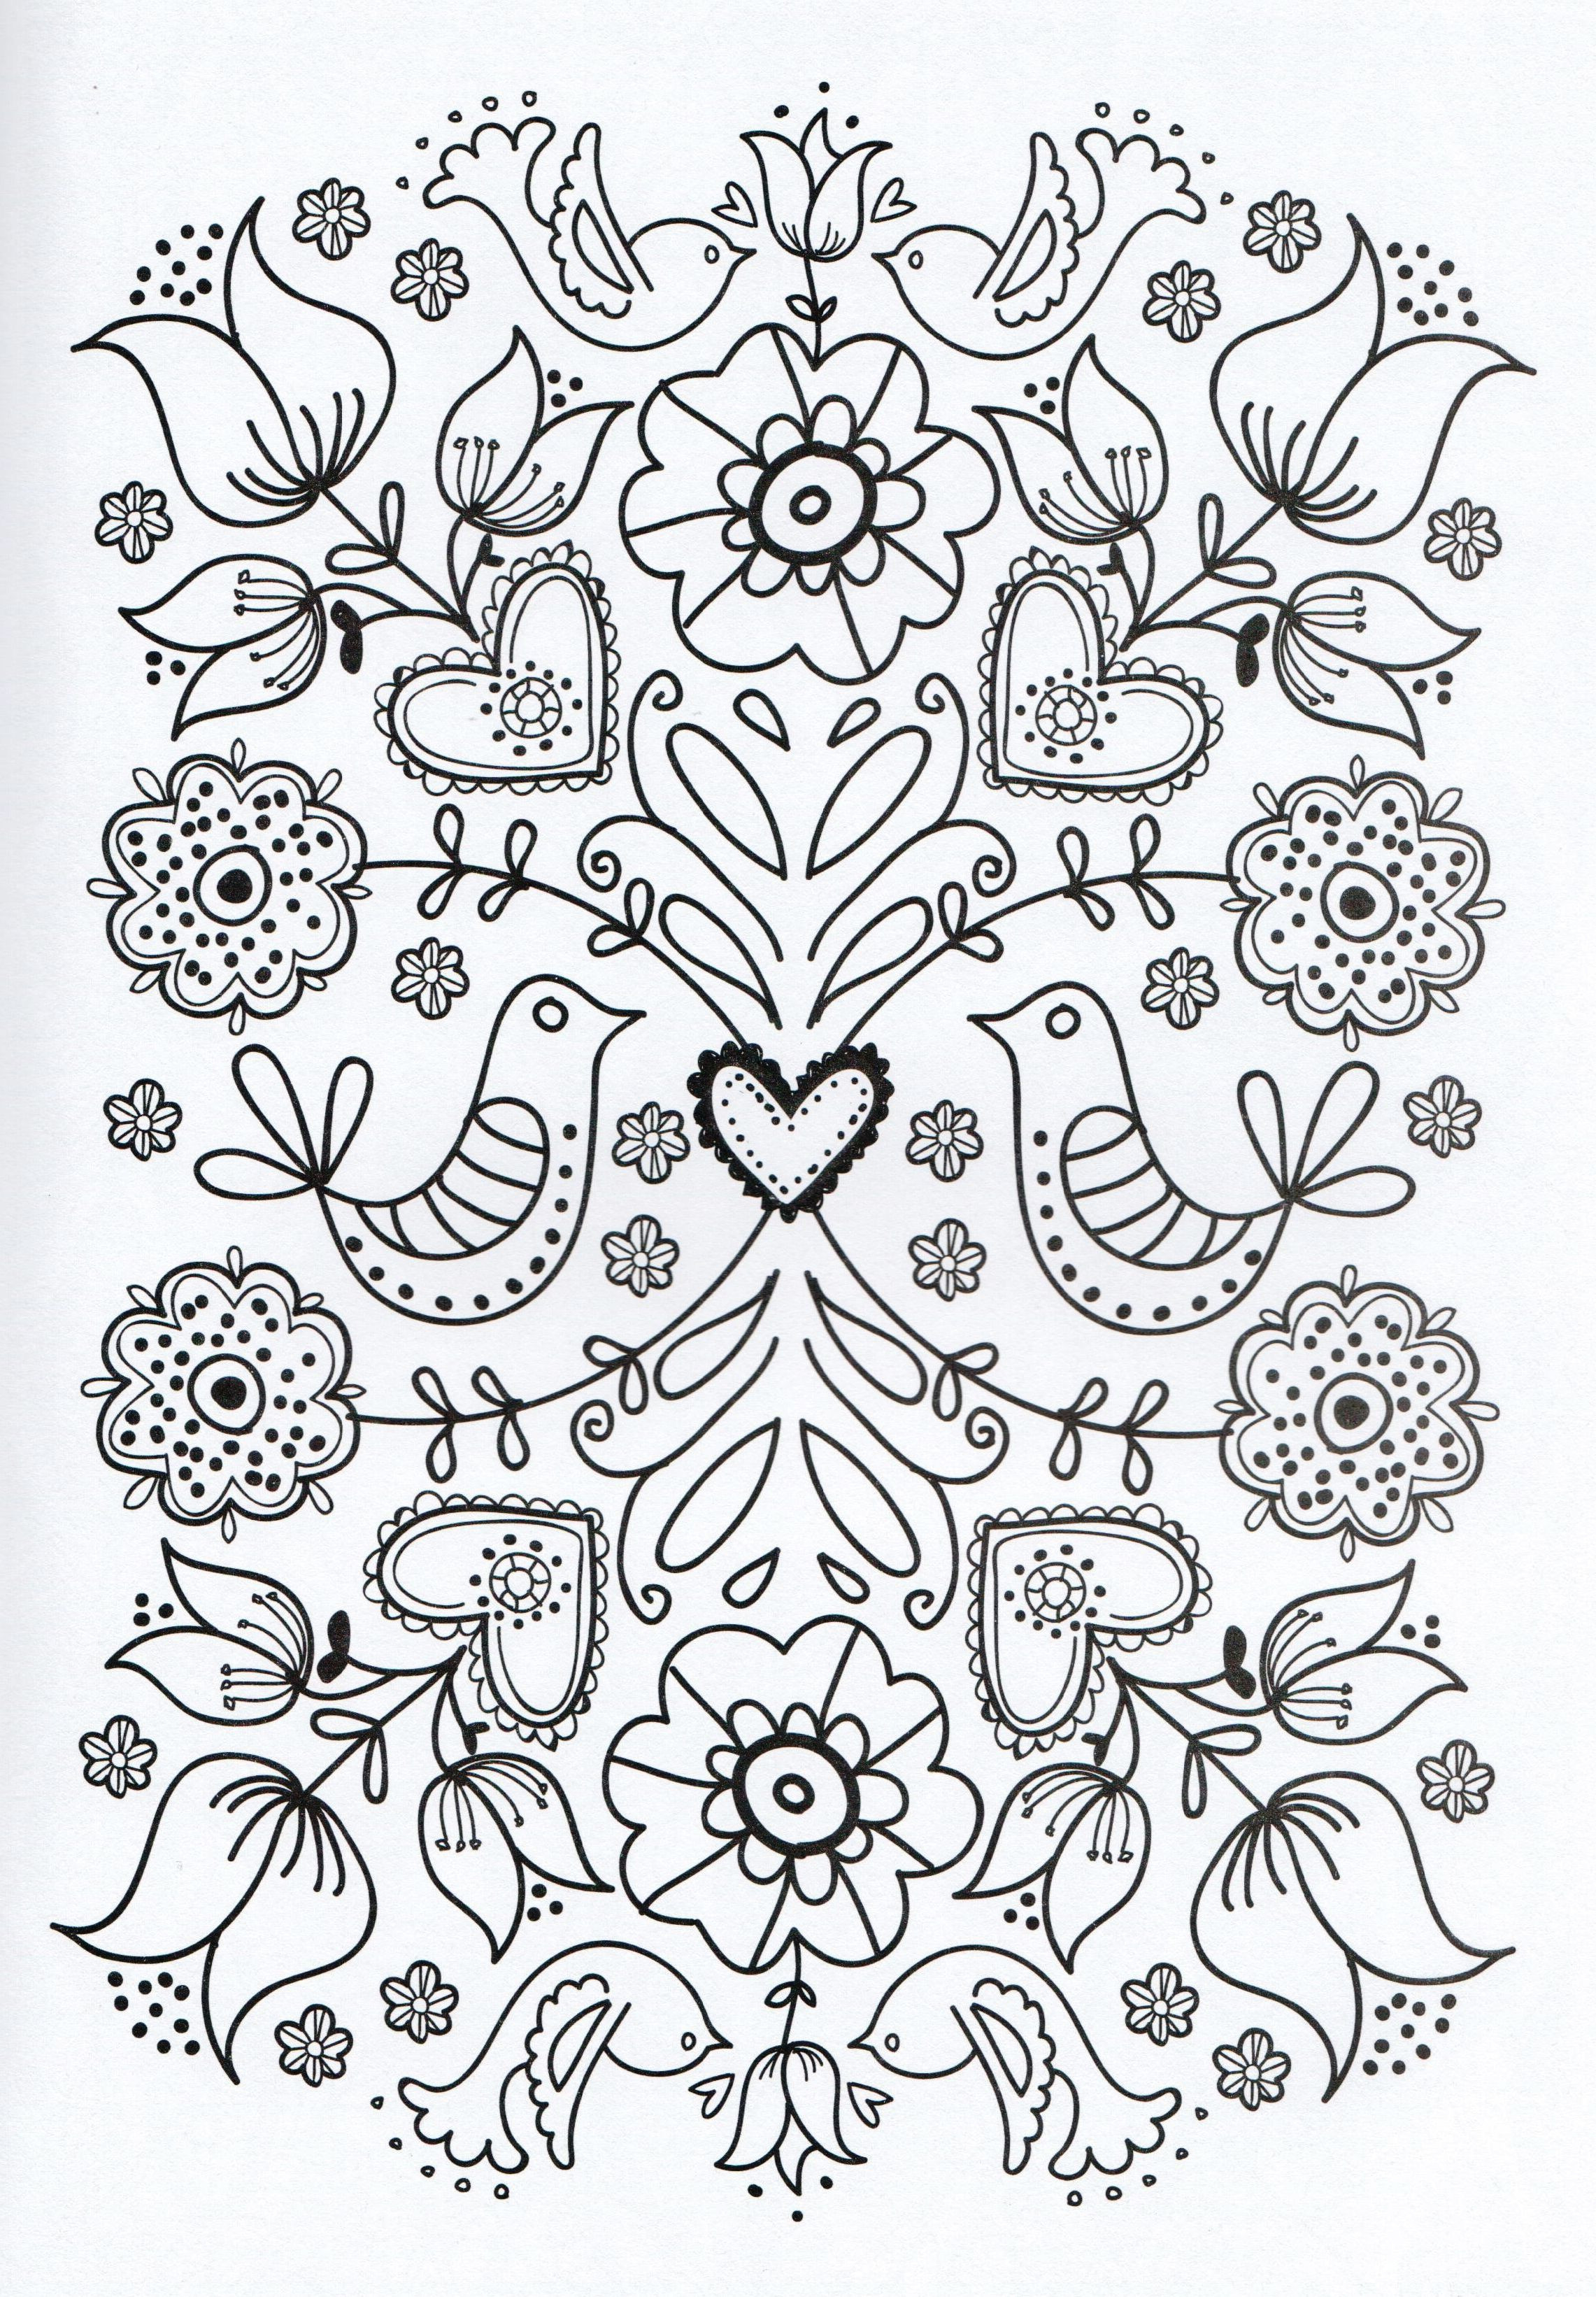 Adult Coloring Pages Easy
 10 Simple & Useful Mother’s Day Gifts to DIY or Buy